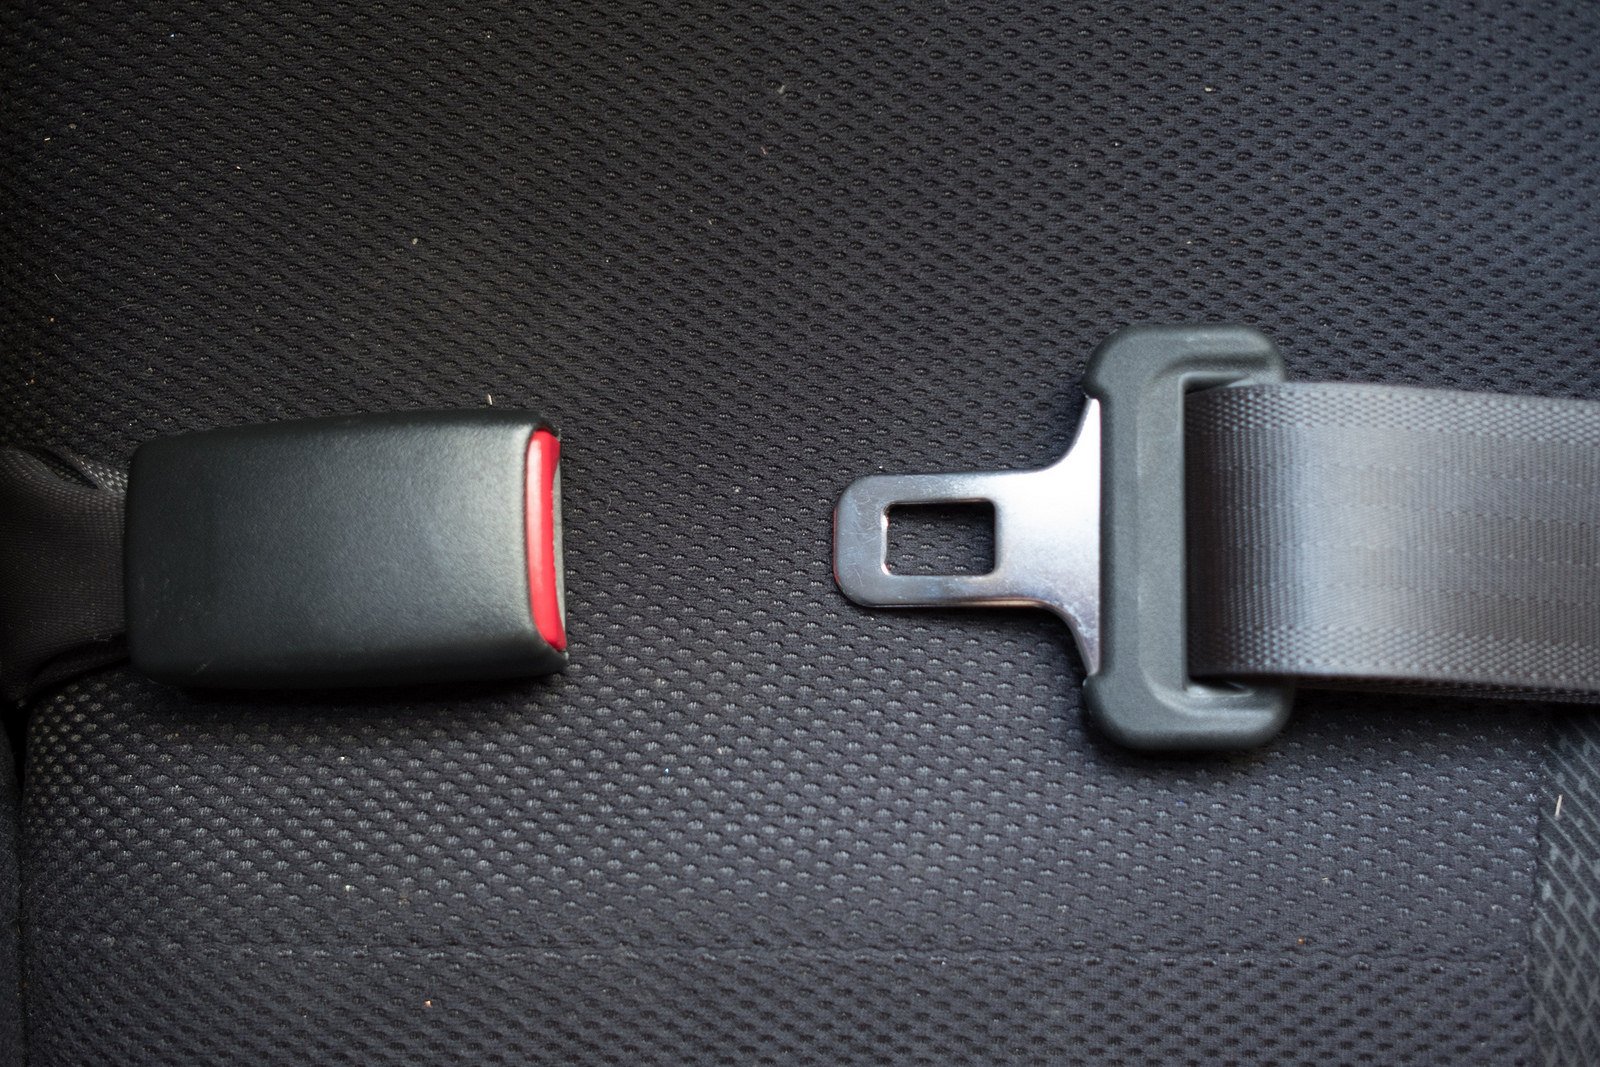 Will my car insurance pay for a broken seatbelt?